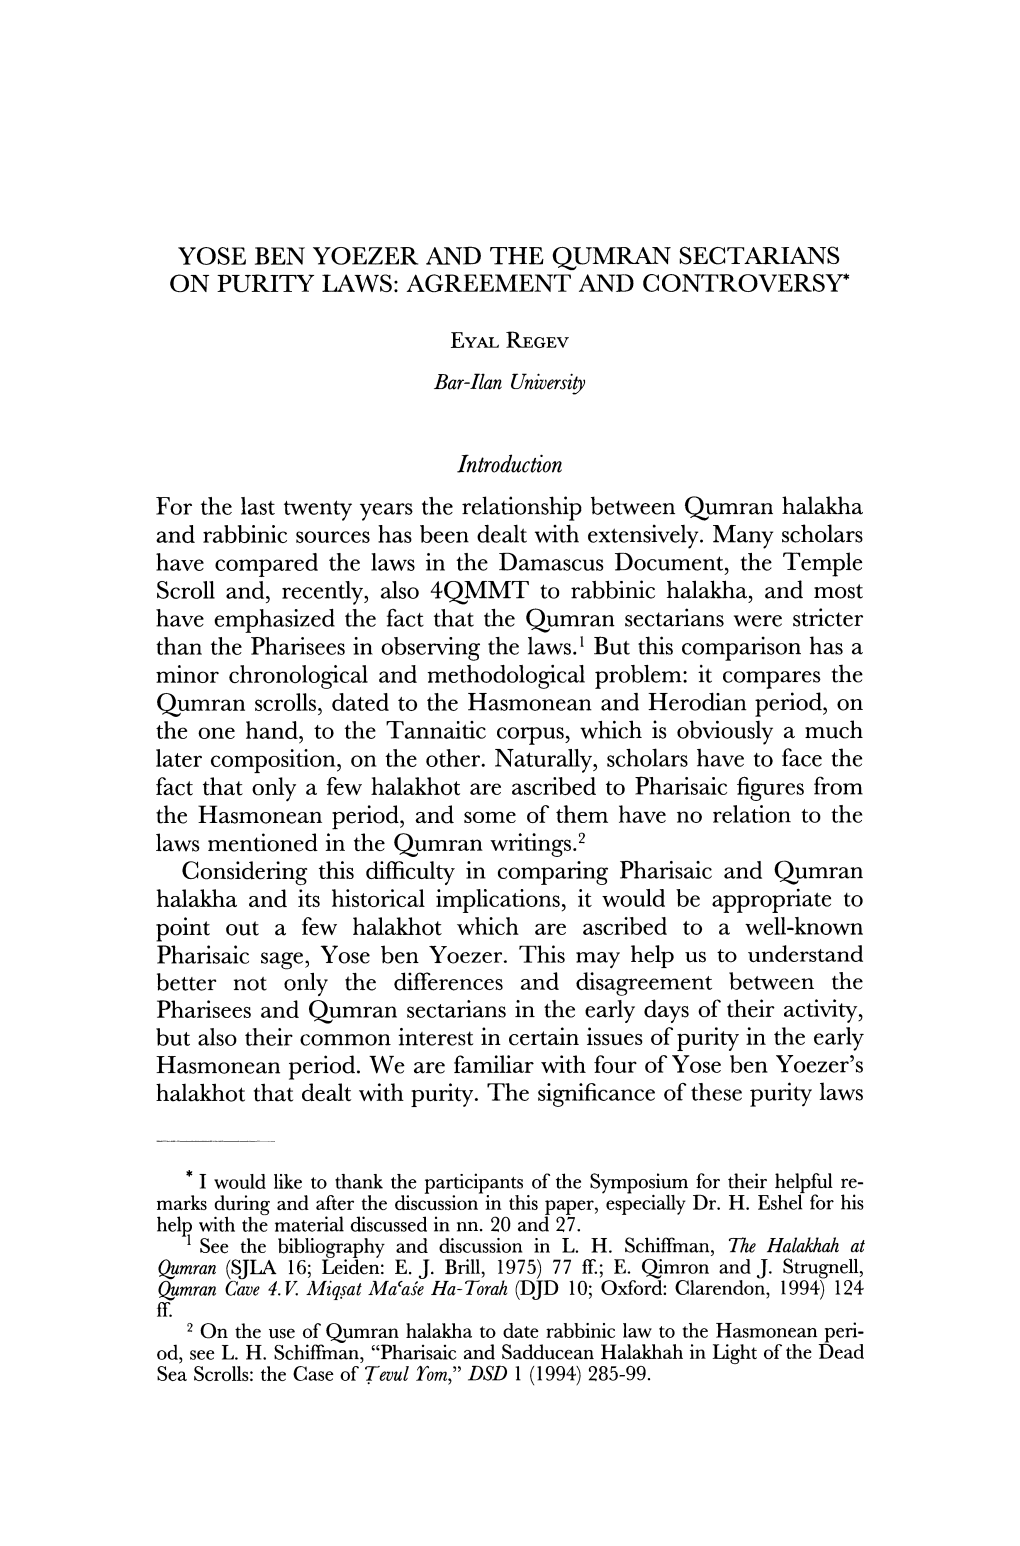 Yose Ben Yoezer and the Qumran Sectarians on Purity Laws: Agreement and Controversy'